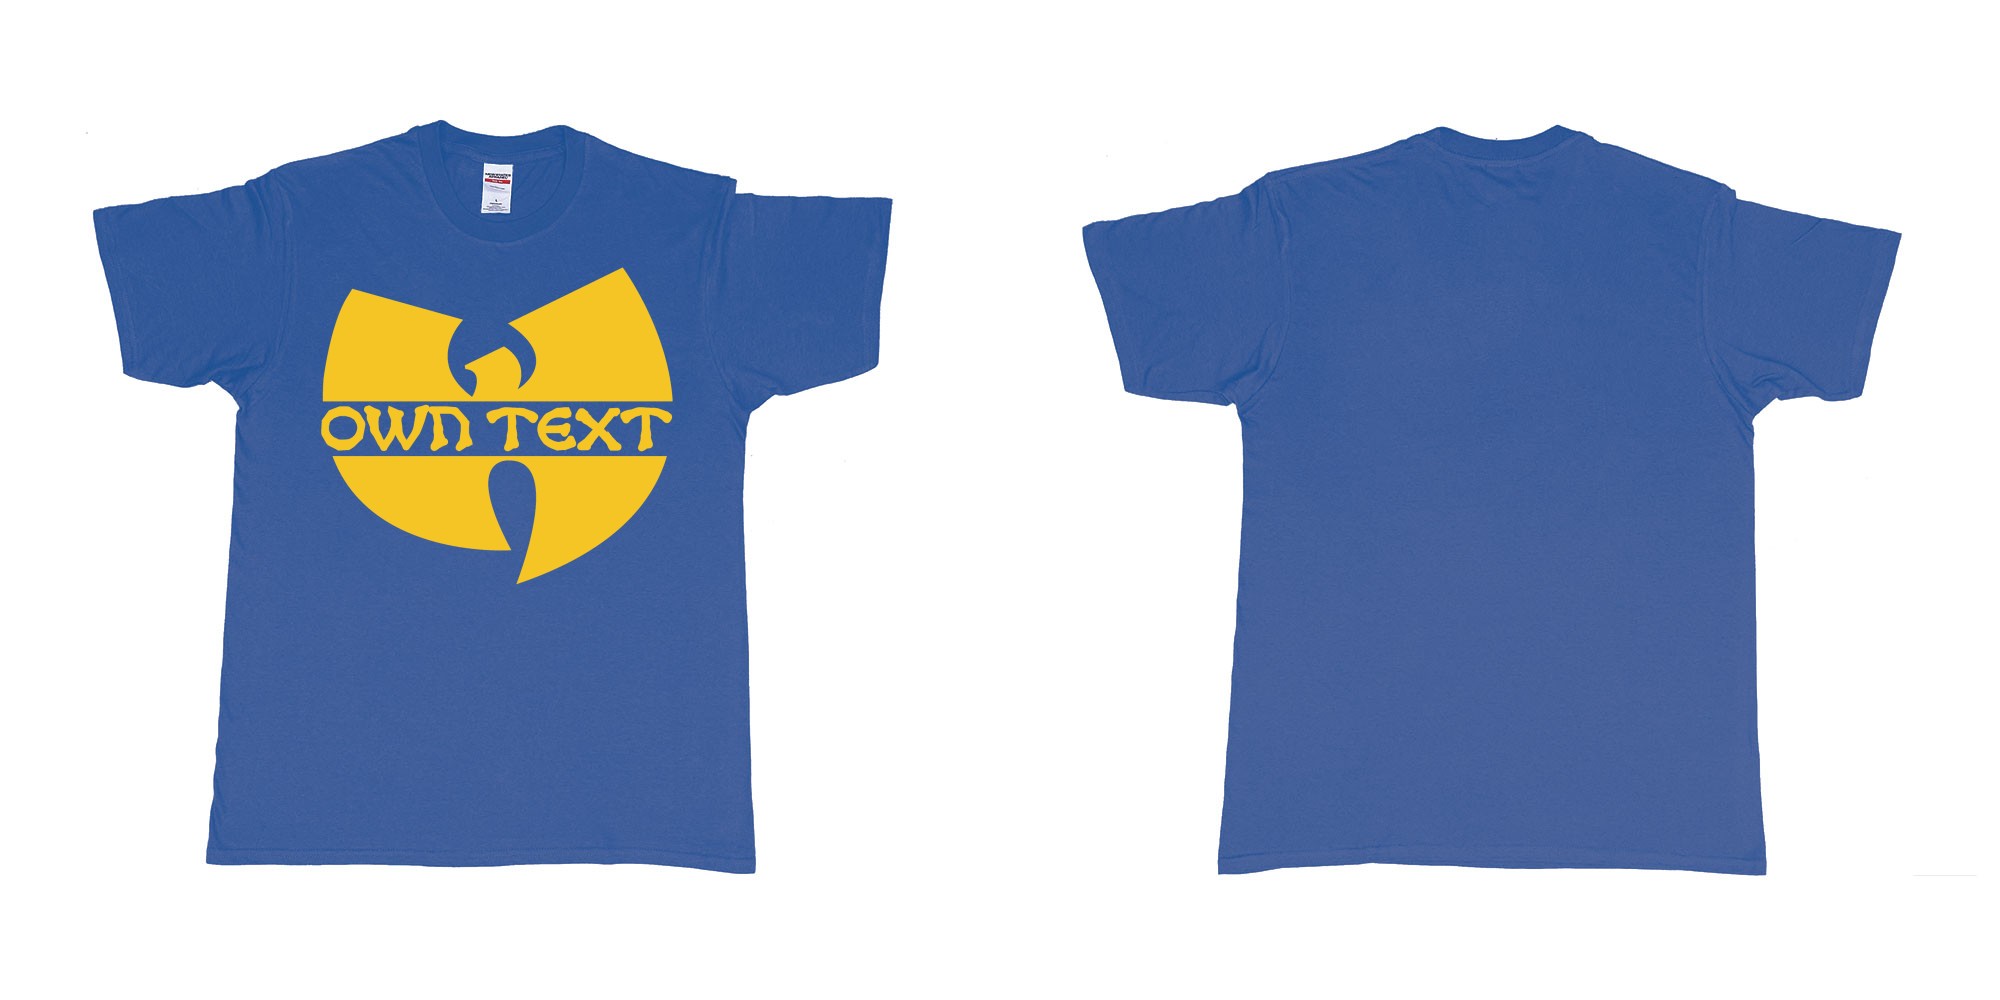 Custom tshirt design wu tang clan logo in fabric color royal-blue choice your own text made in Bali by The Pirate Way